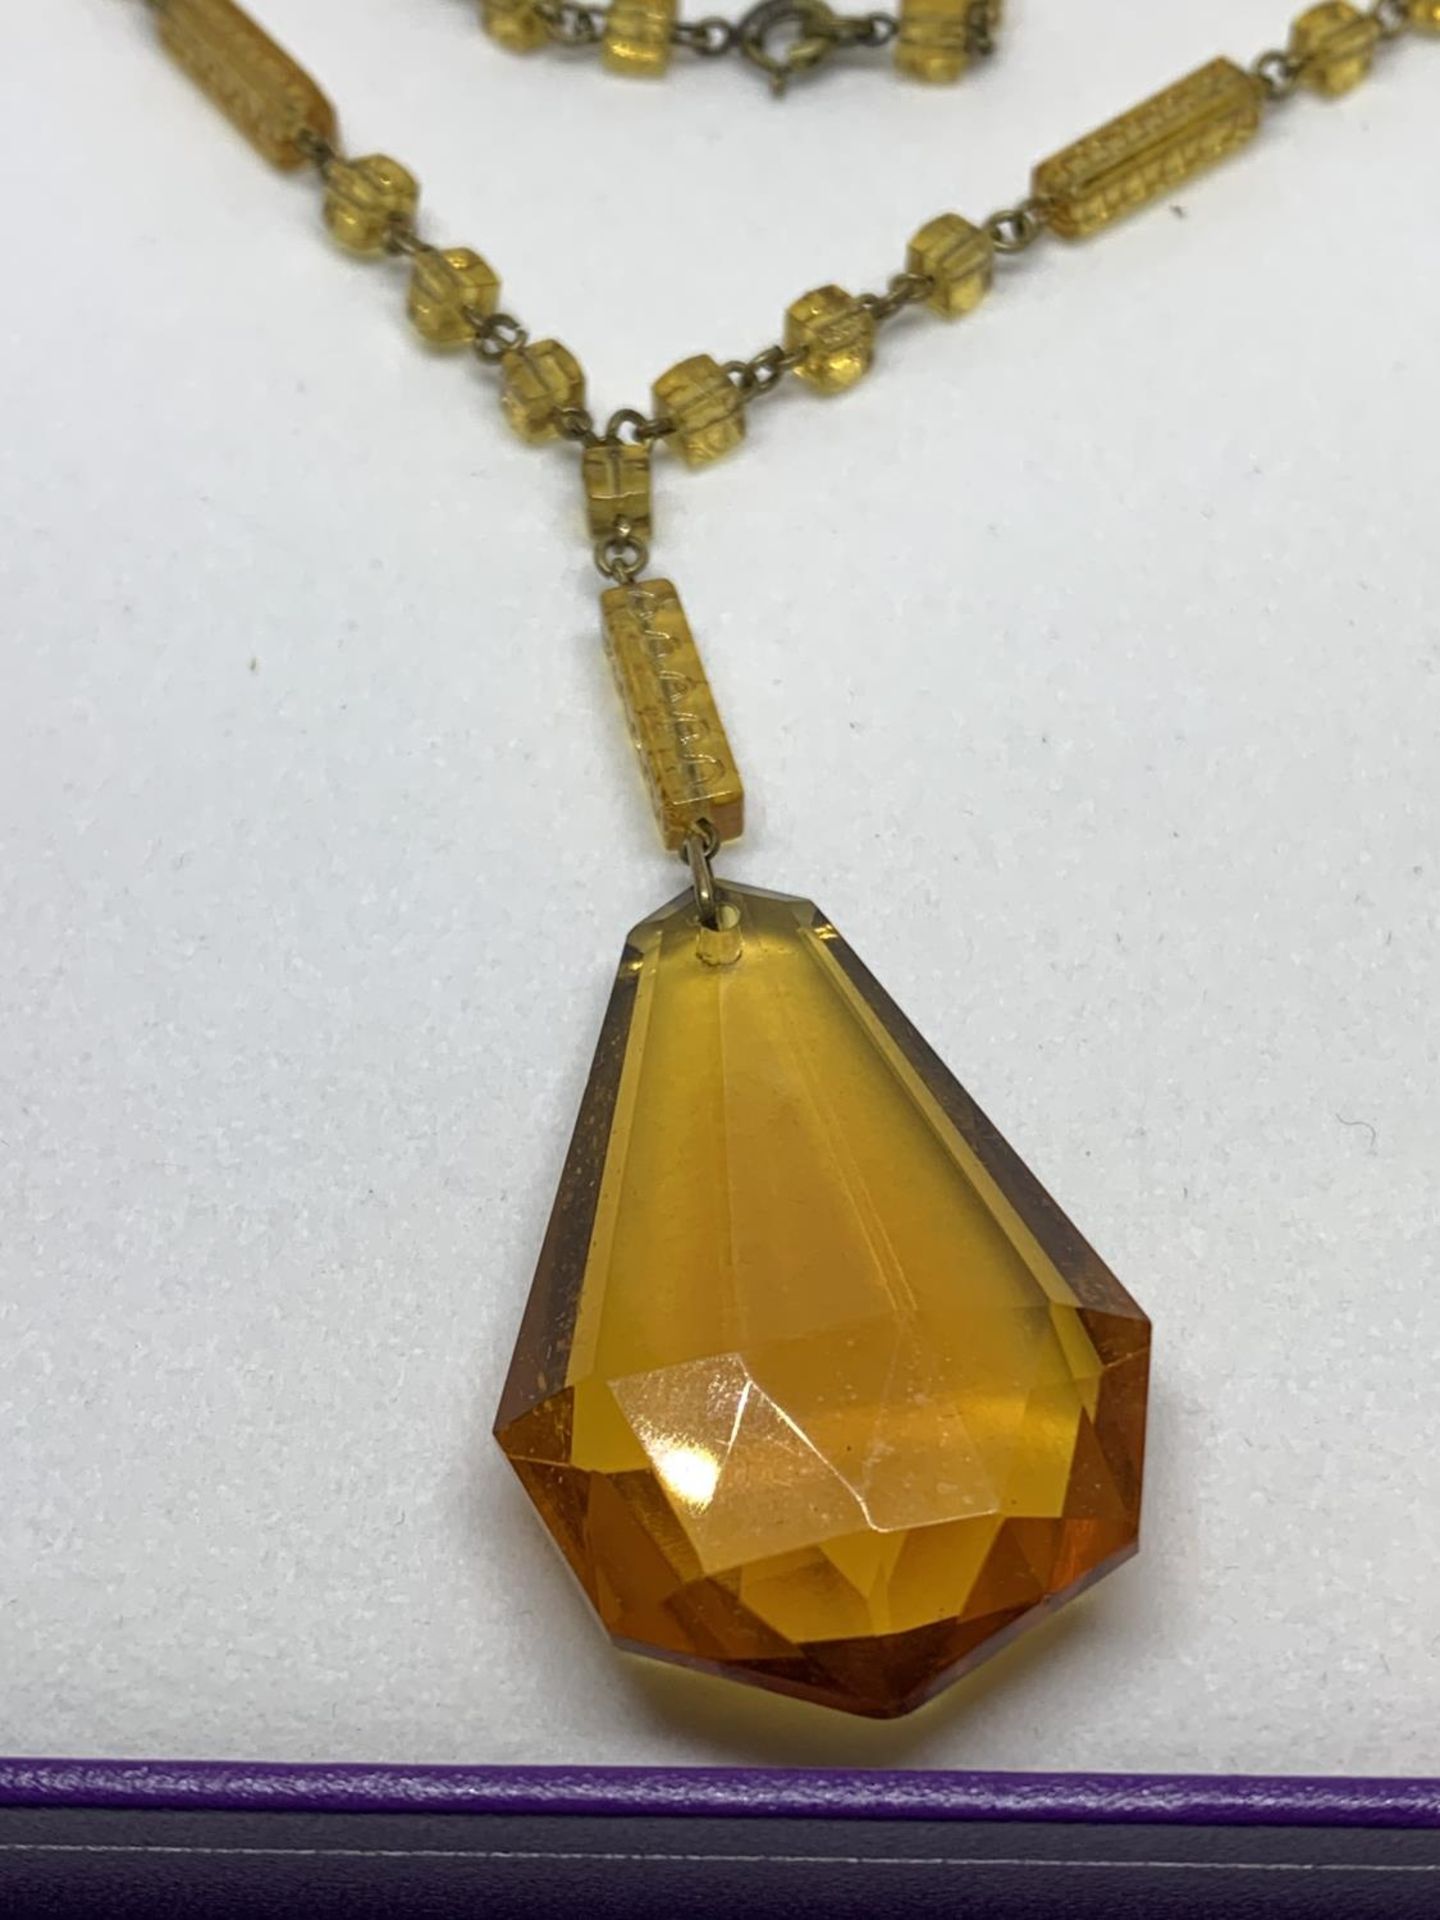 A YELLOW COLOURED NECKLACE IN A PRESENTATION BOX - Image 2 of 2